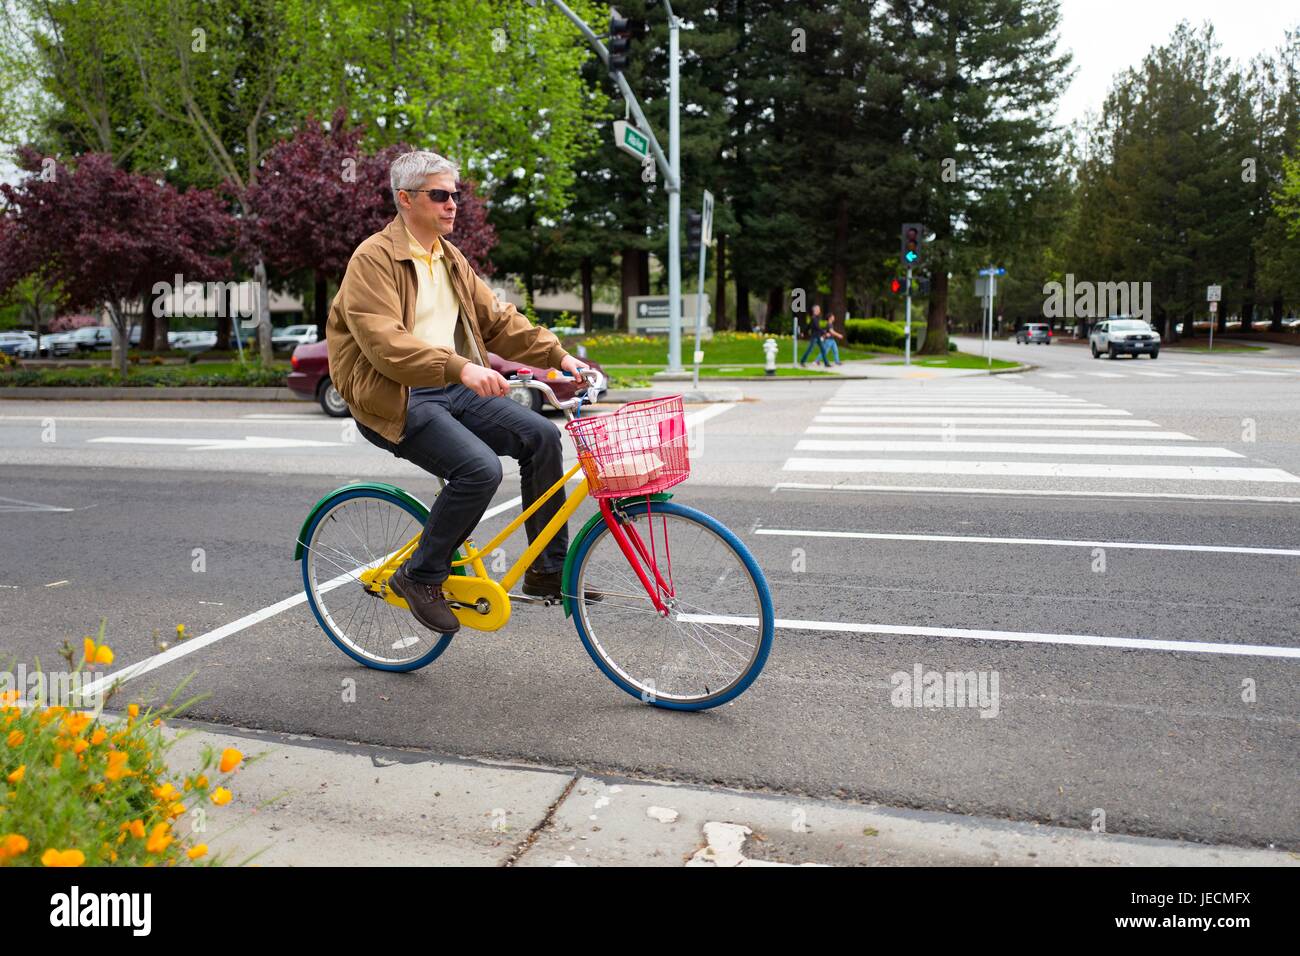 A middle-aged, male employee of Google Inc rides a colorful Google Bike down a road at the Googleplex, headquarters of Google Inc in the Silicon Valley town of Mountain View, California, April 7, 2017. Stock Photo